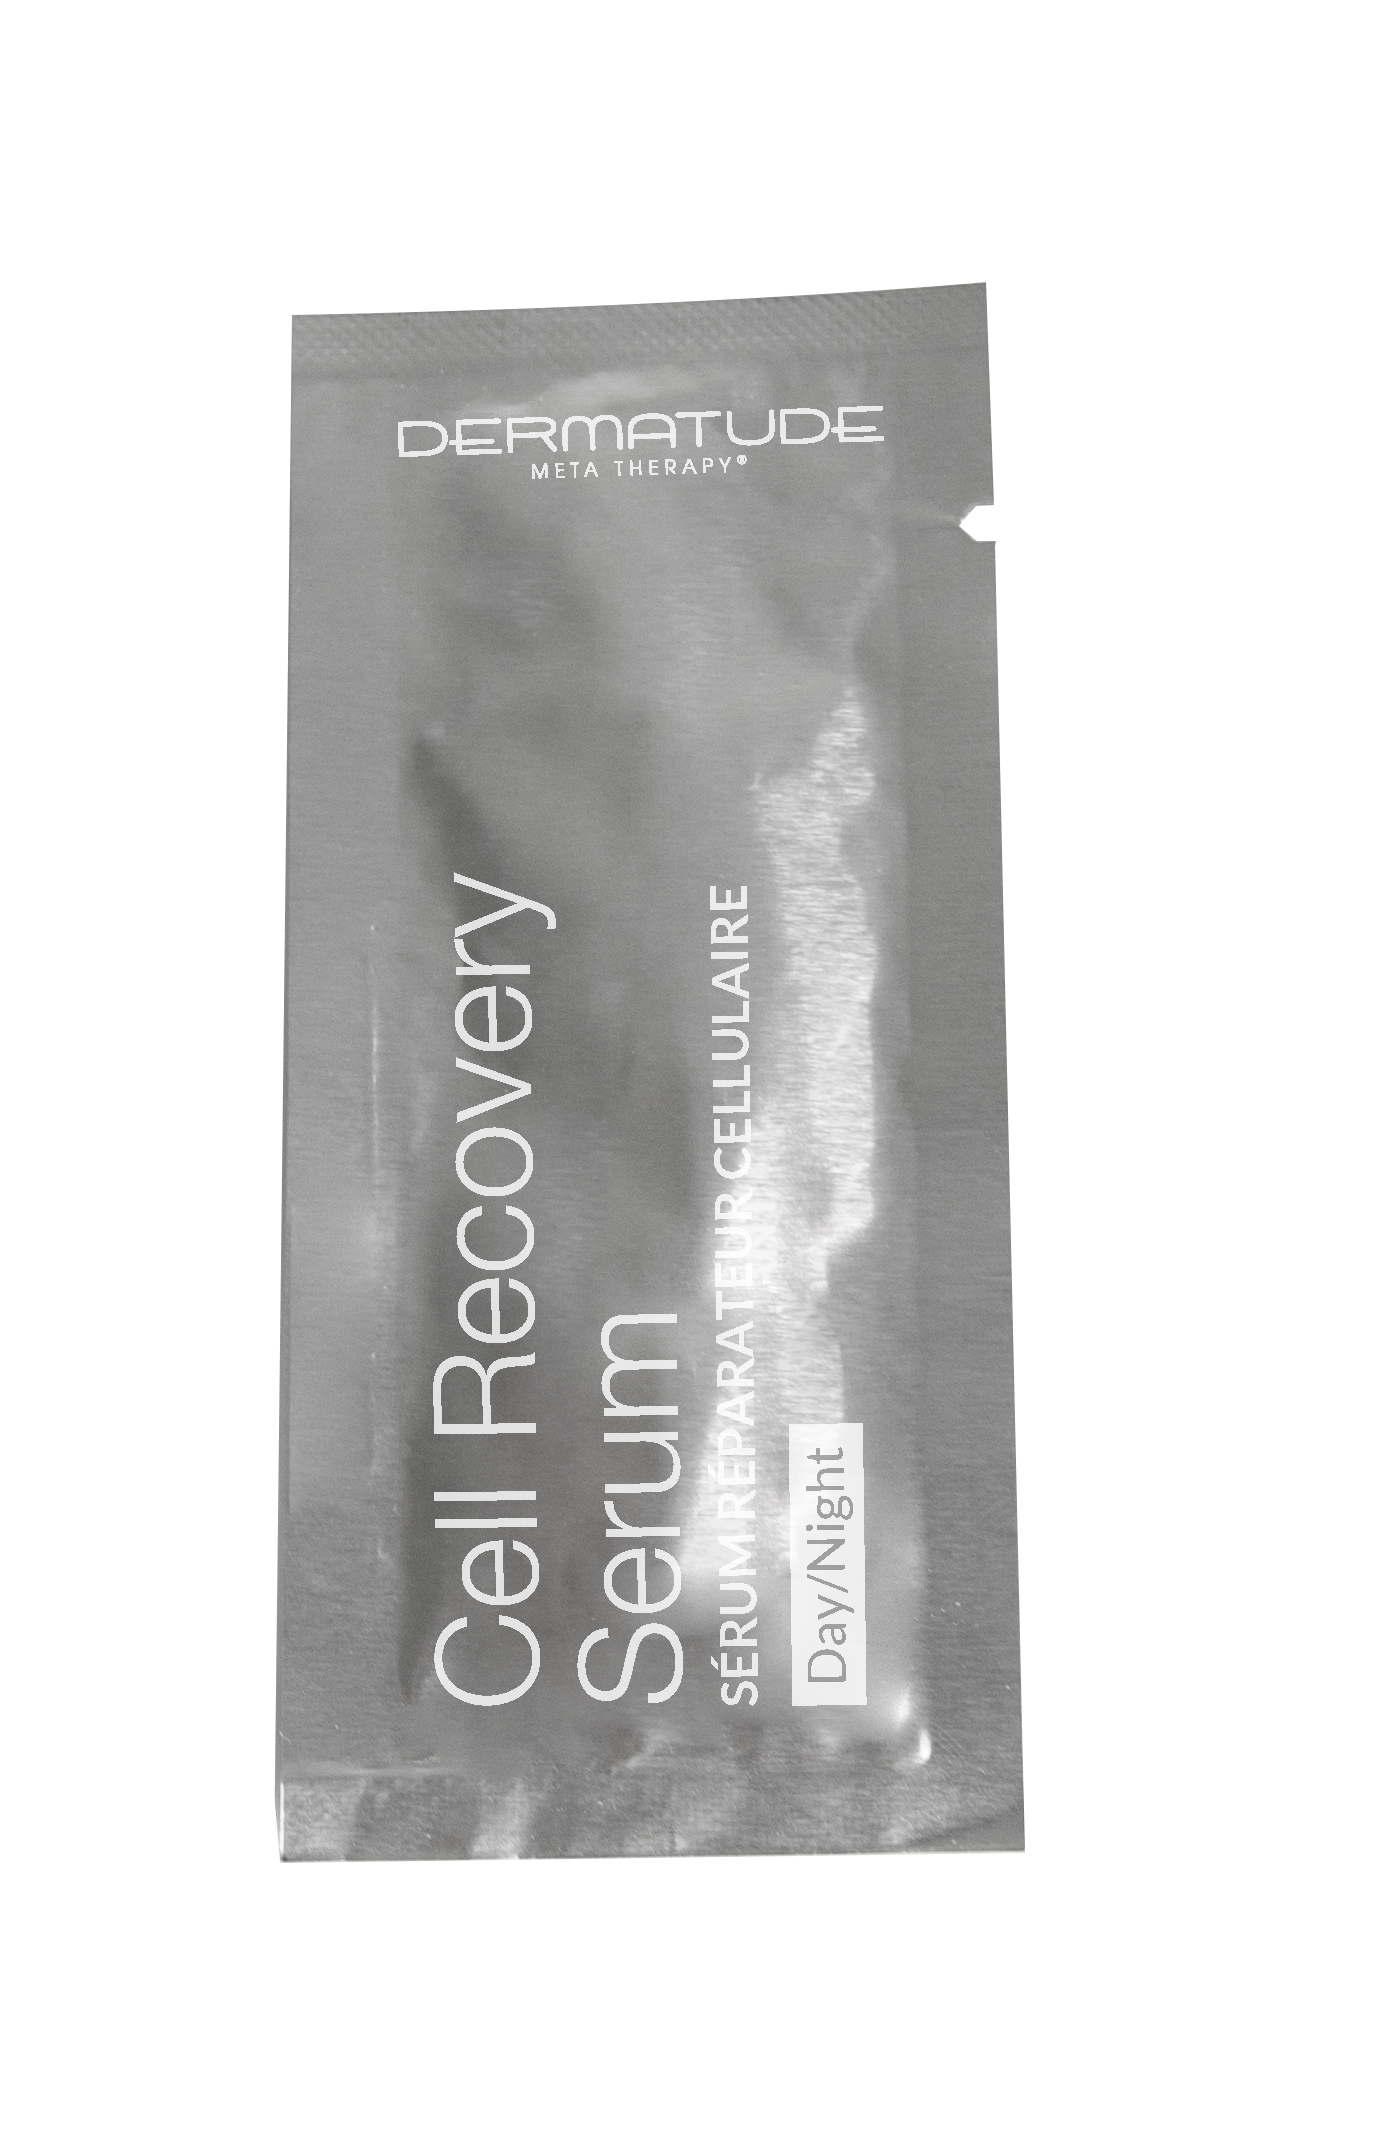 (DO NOT SELL) Dermatude Cell Recovery Cream (Sample 2 ml - Box of 100 Pieces)